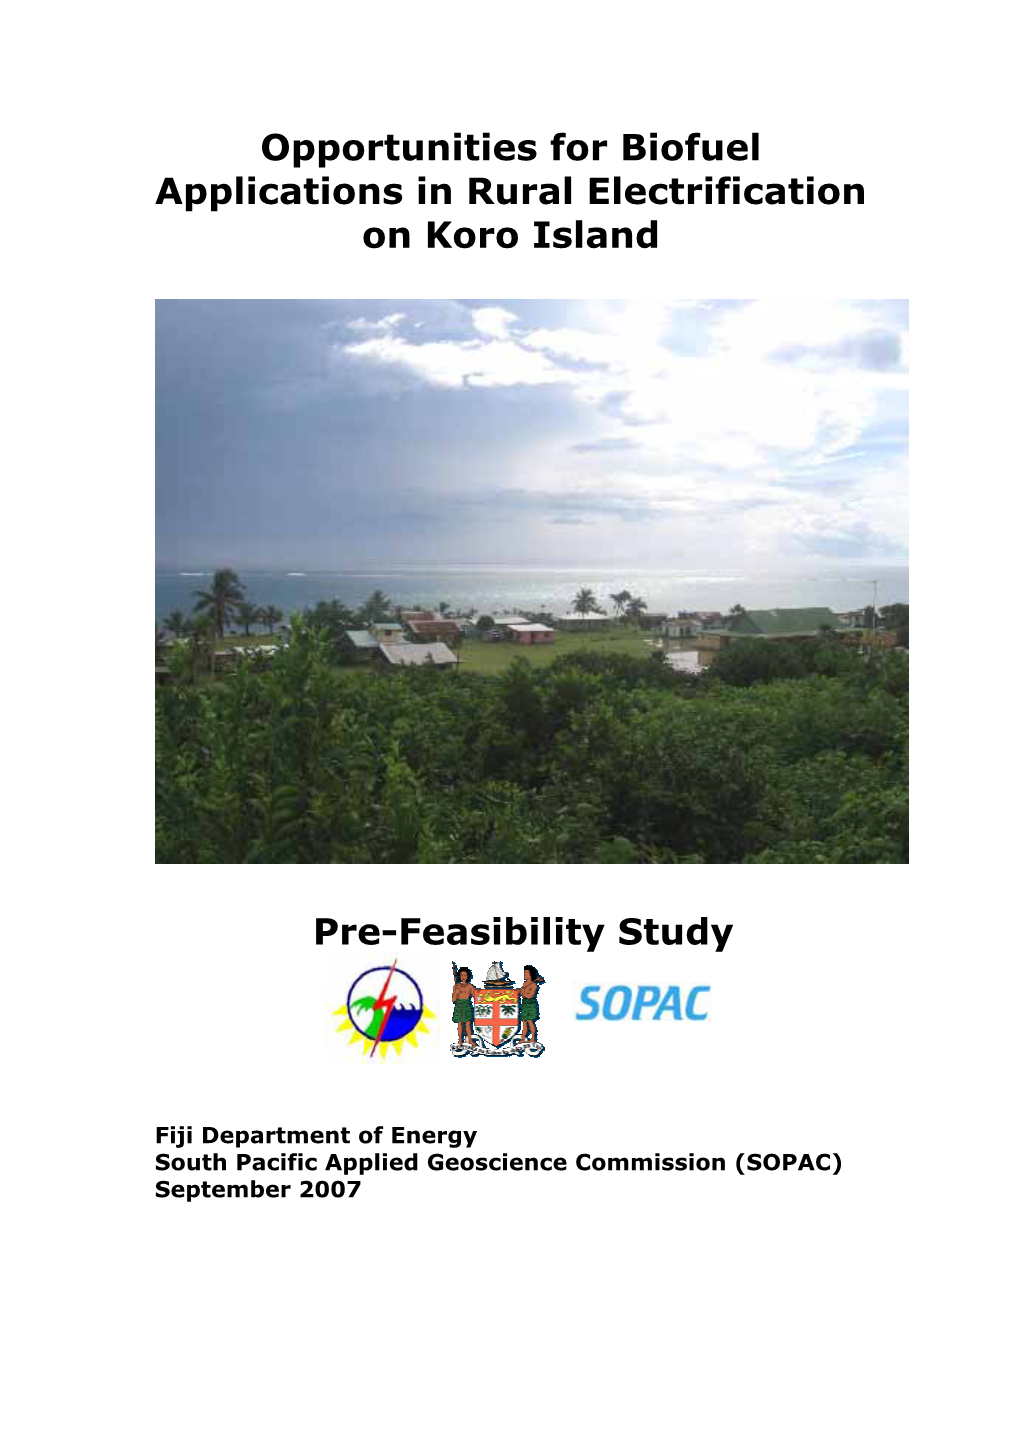 Opportunities for Biofuel Applications in Rural Electrification on Koro Island